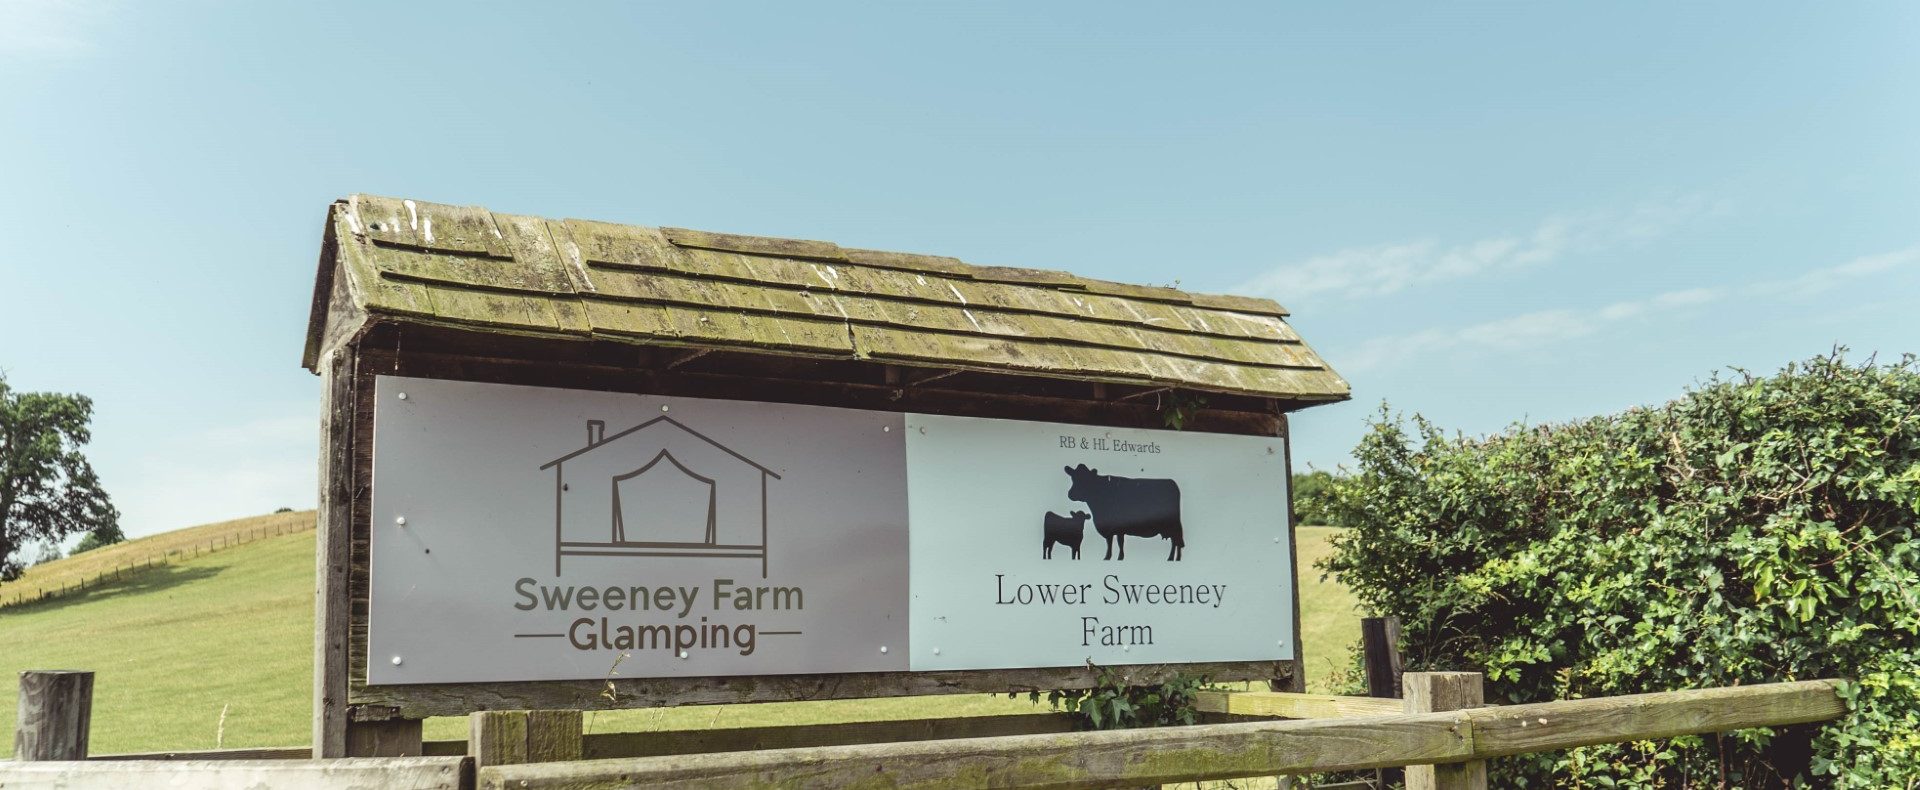 sweeney farm glamping | group getaway uk | family breaks with hot tub